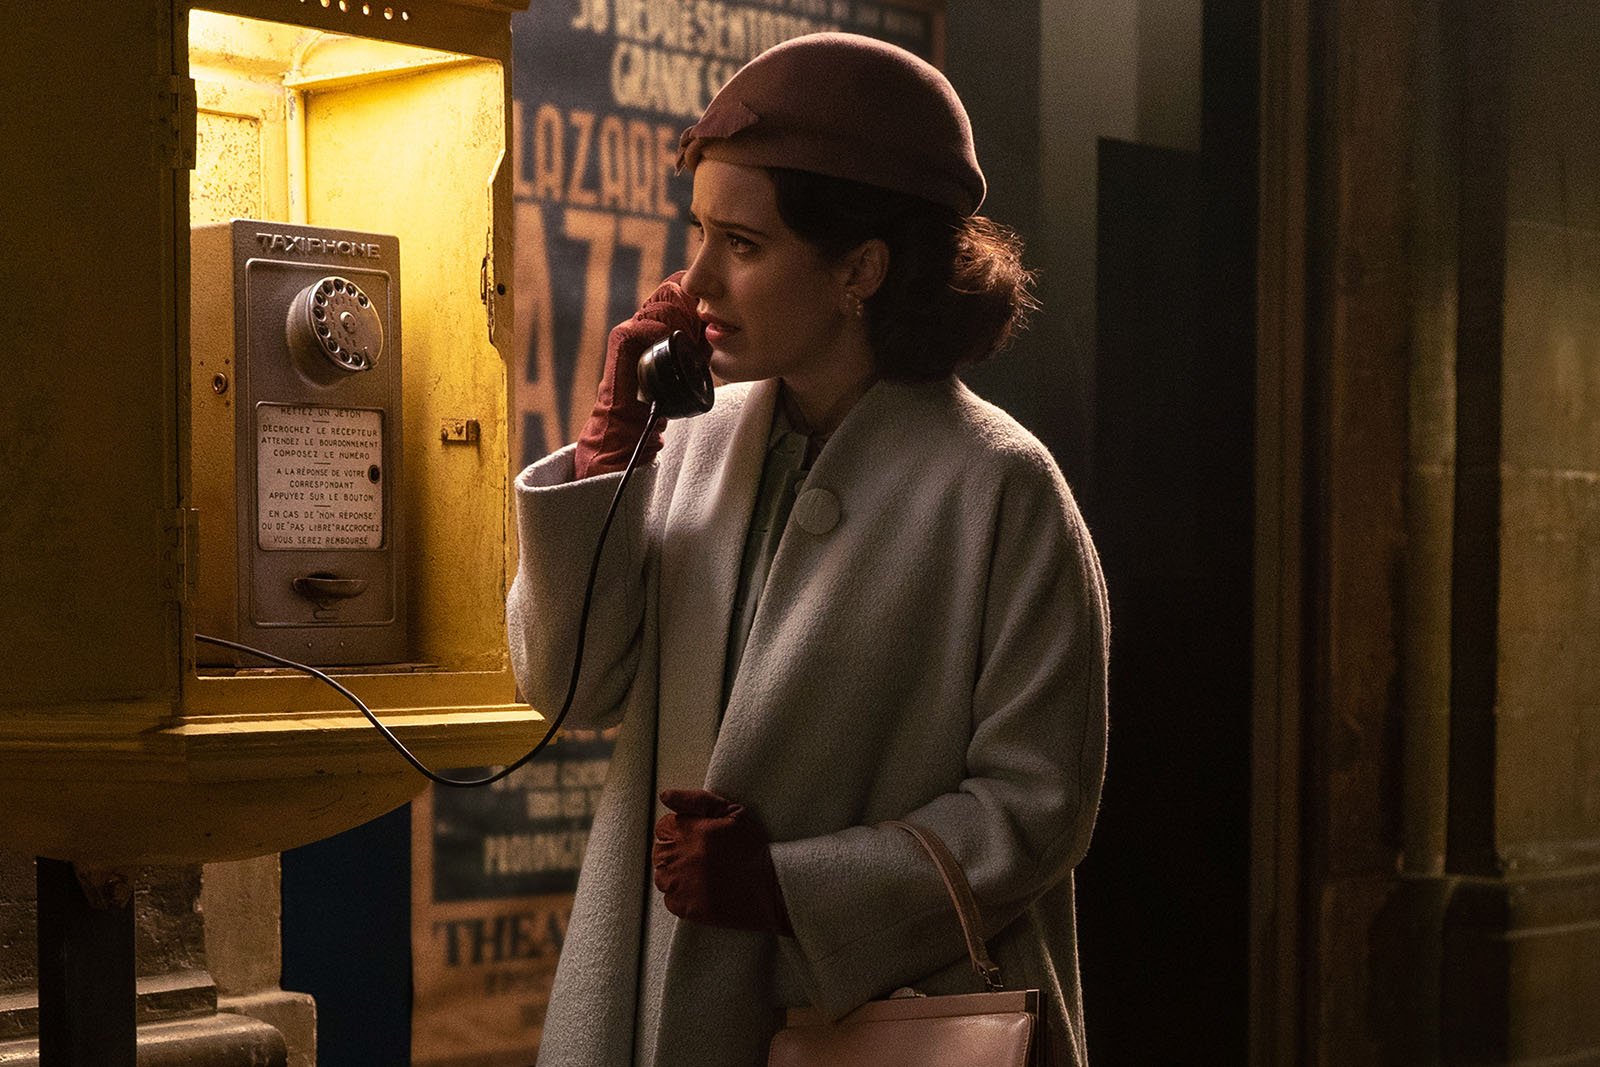 “A phone call is a tight eyeline.” Rachel Brosnahan’s emotional performance was due in part to having Michael Zegan close by. Image © Amazon Studios